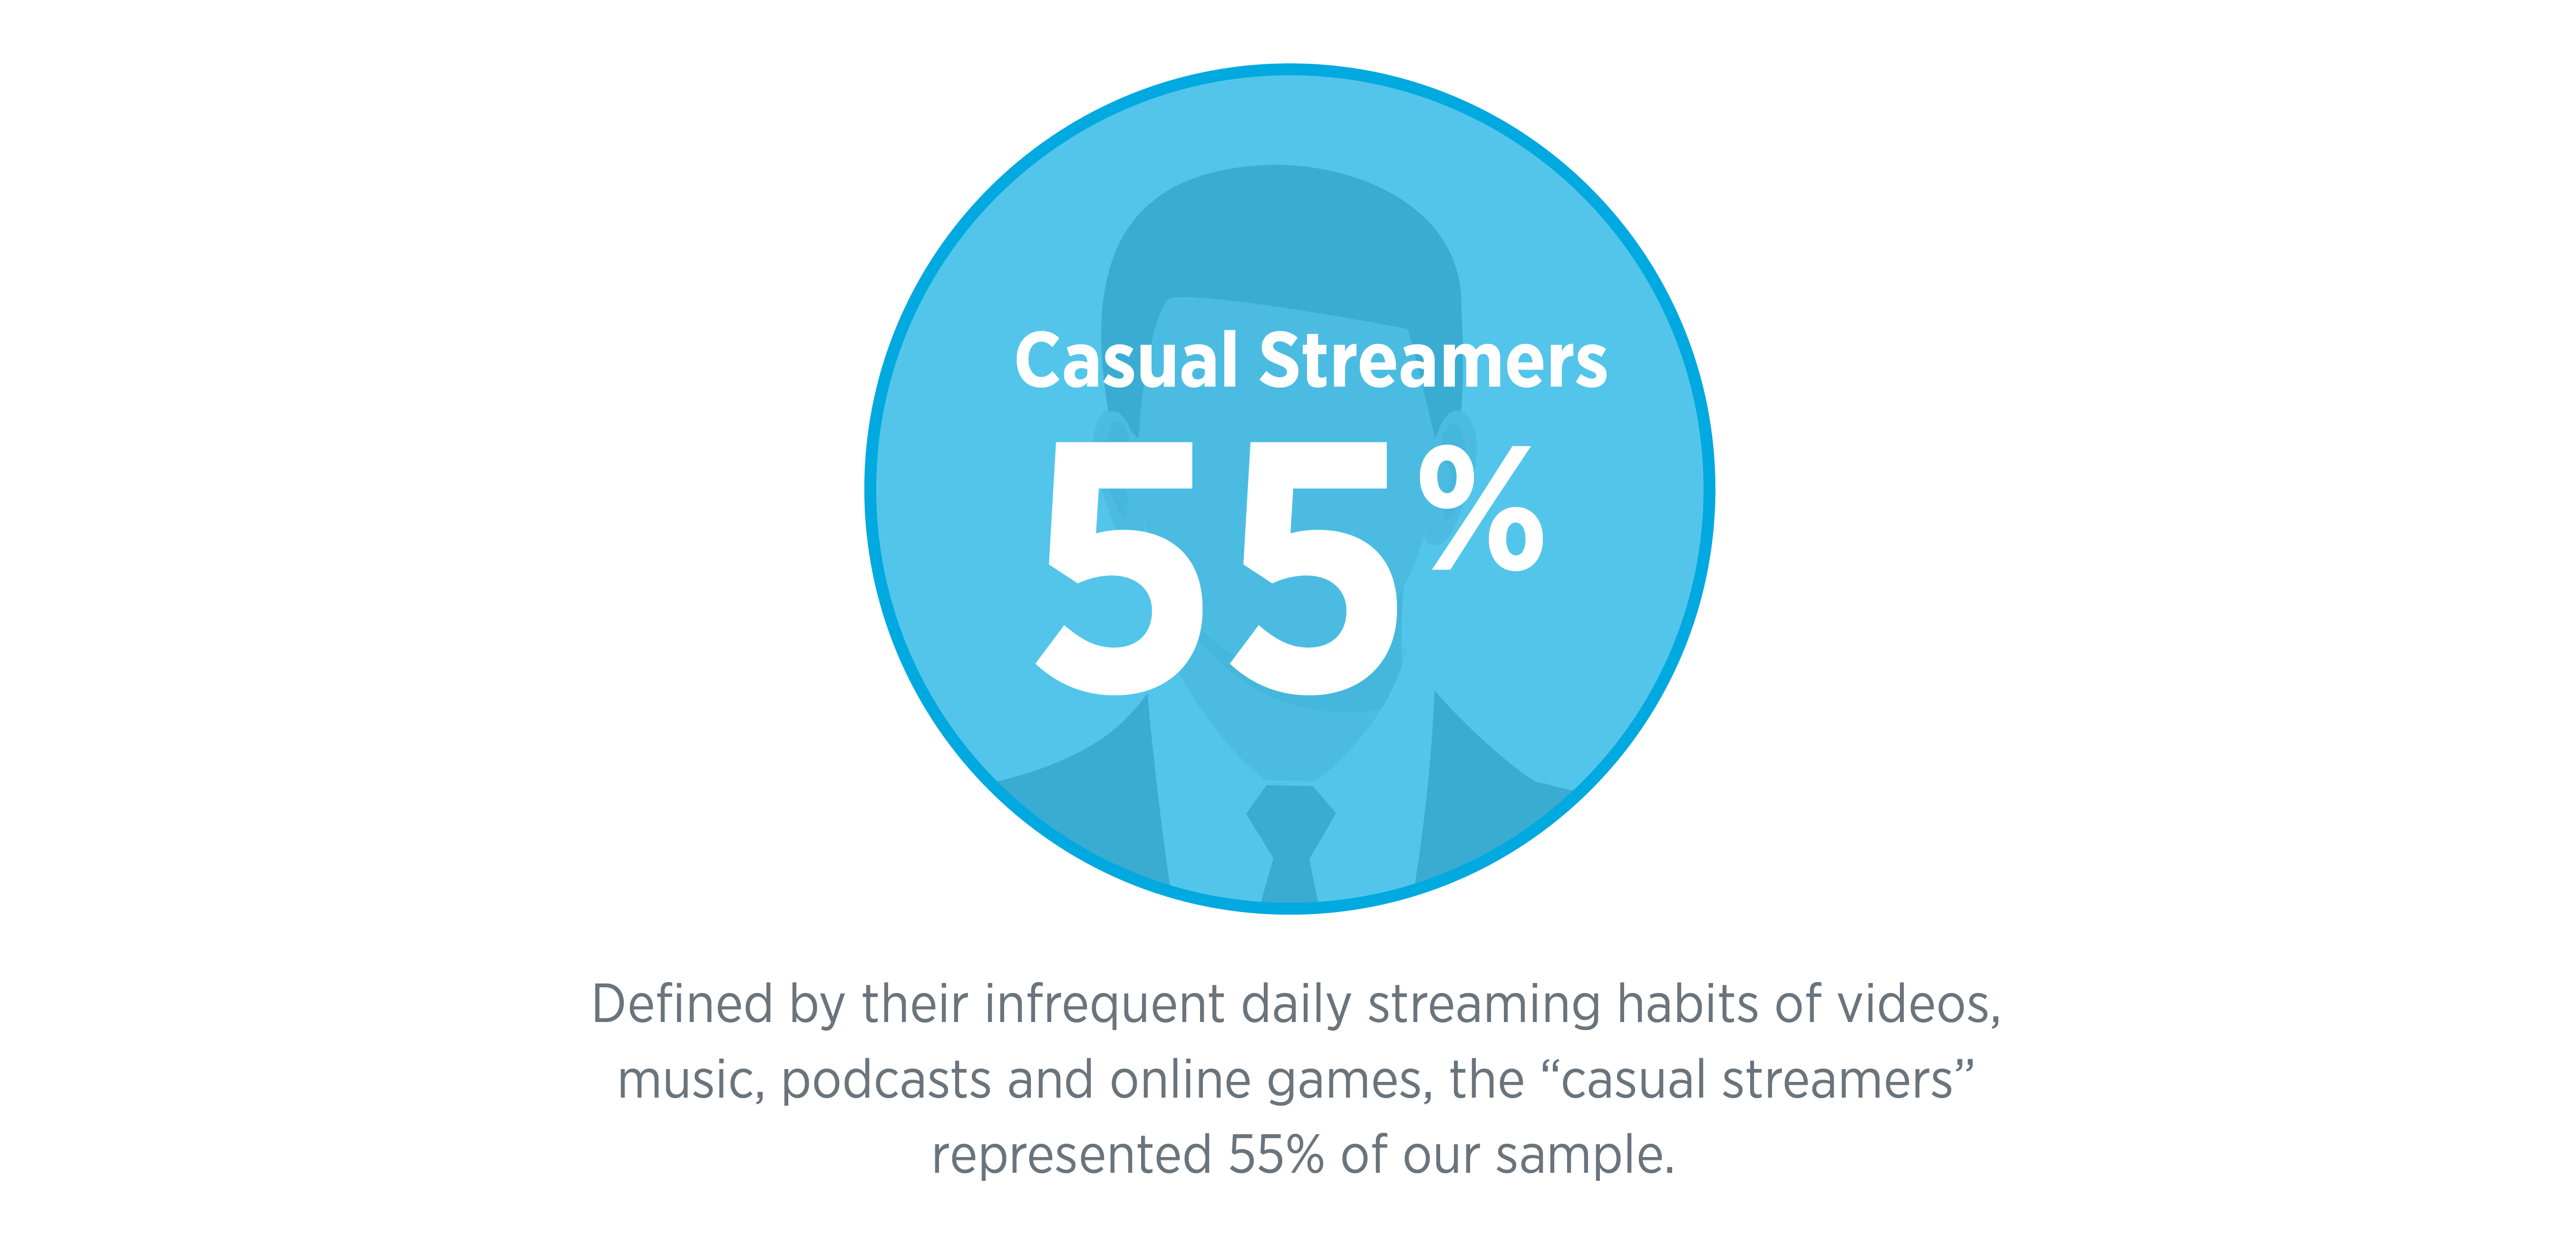 Casual streamers 55%